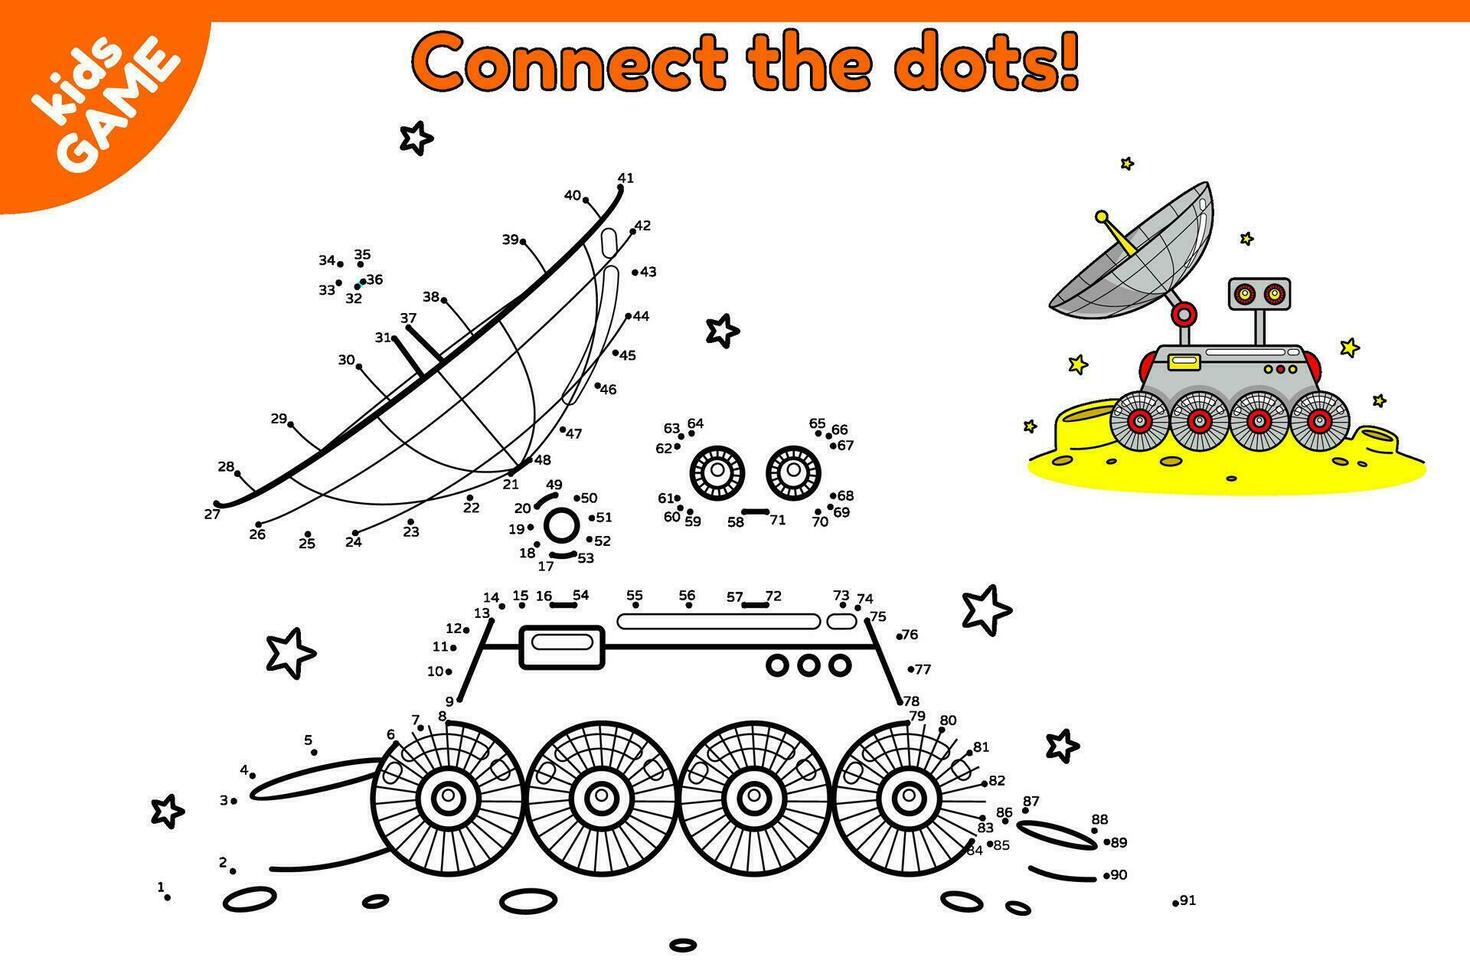 Dot to dot game for children. Connect the dots and draw a cartoon lunar rover on moon in space. Activity book for kids. Educational puzzle for preschool and school education. Vector lunokhod in cosmos